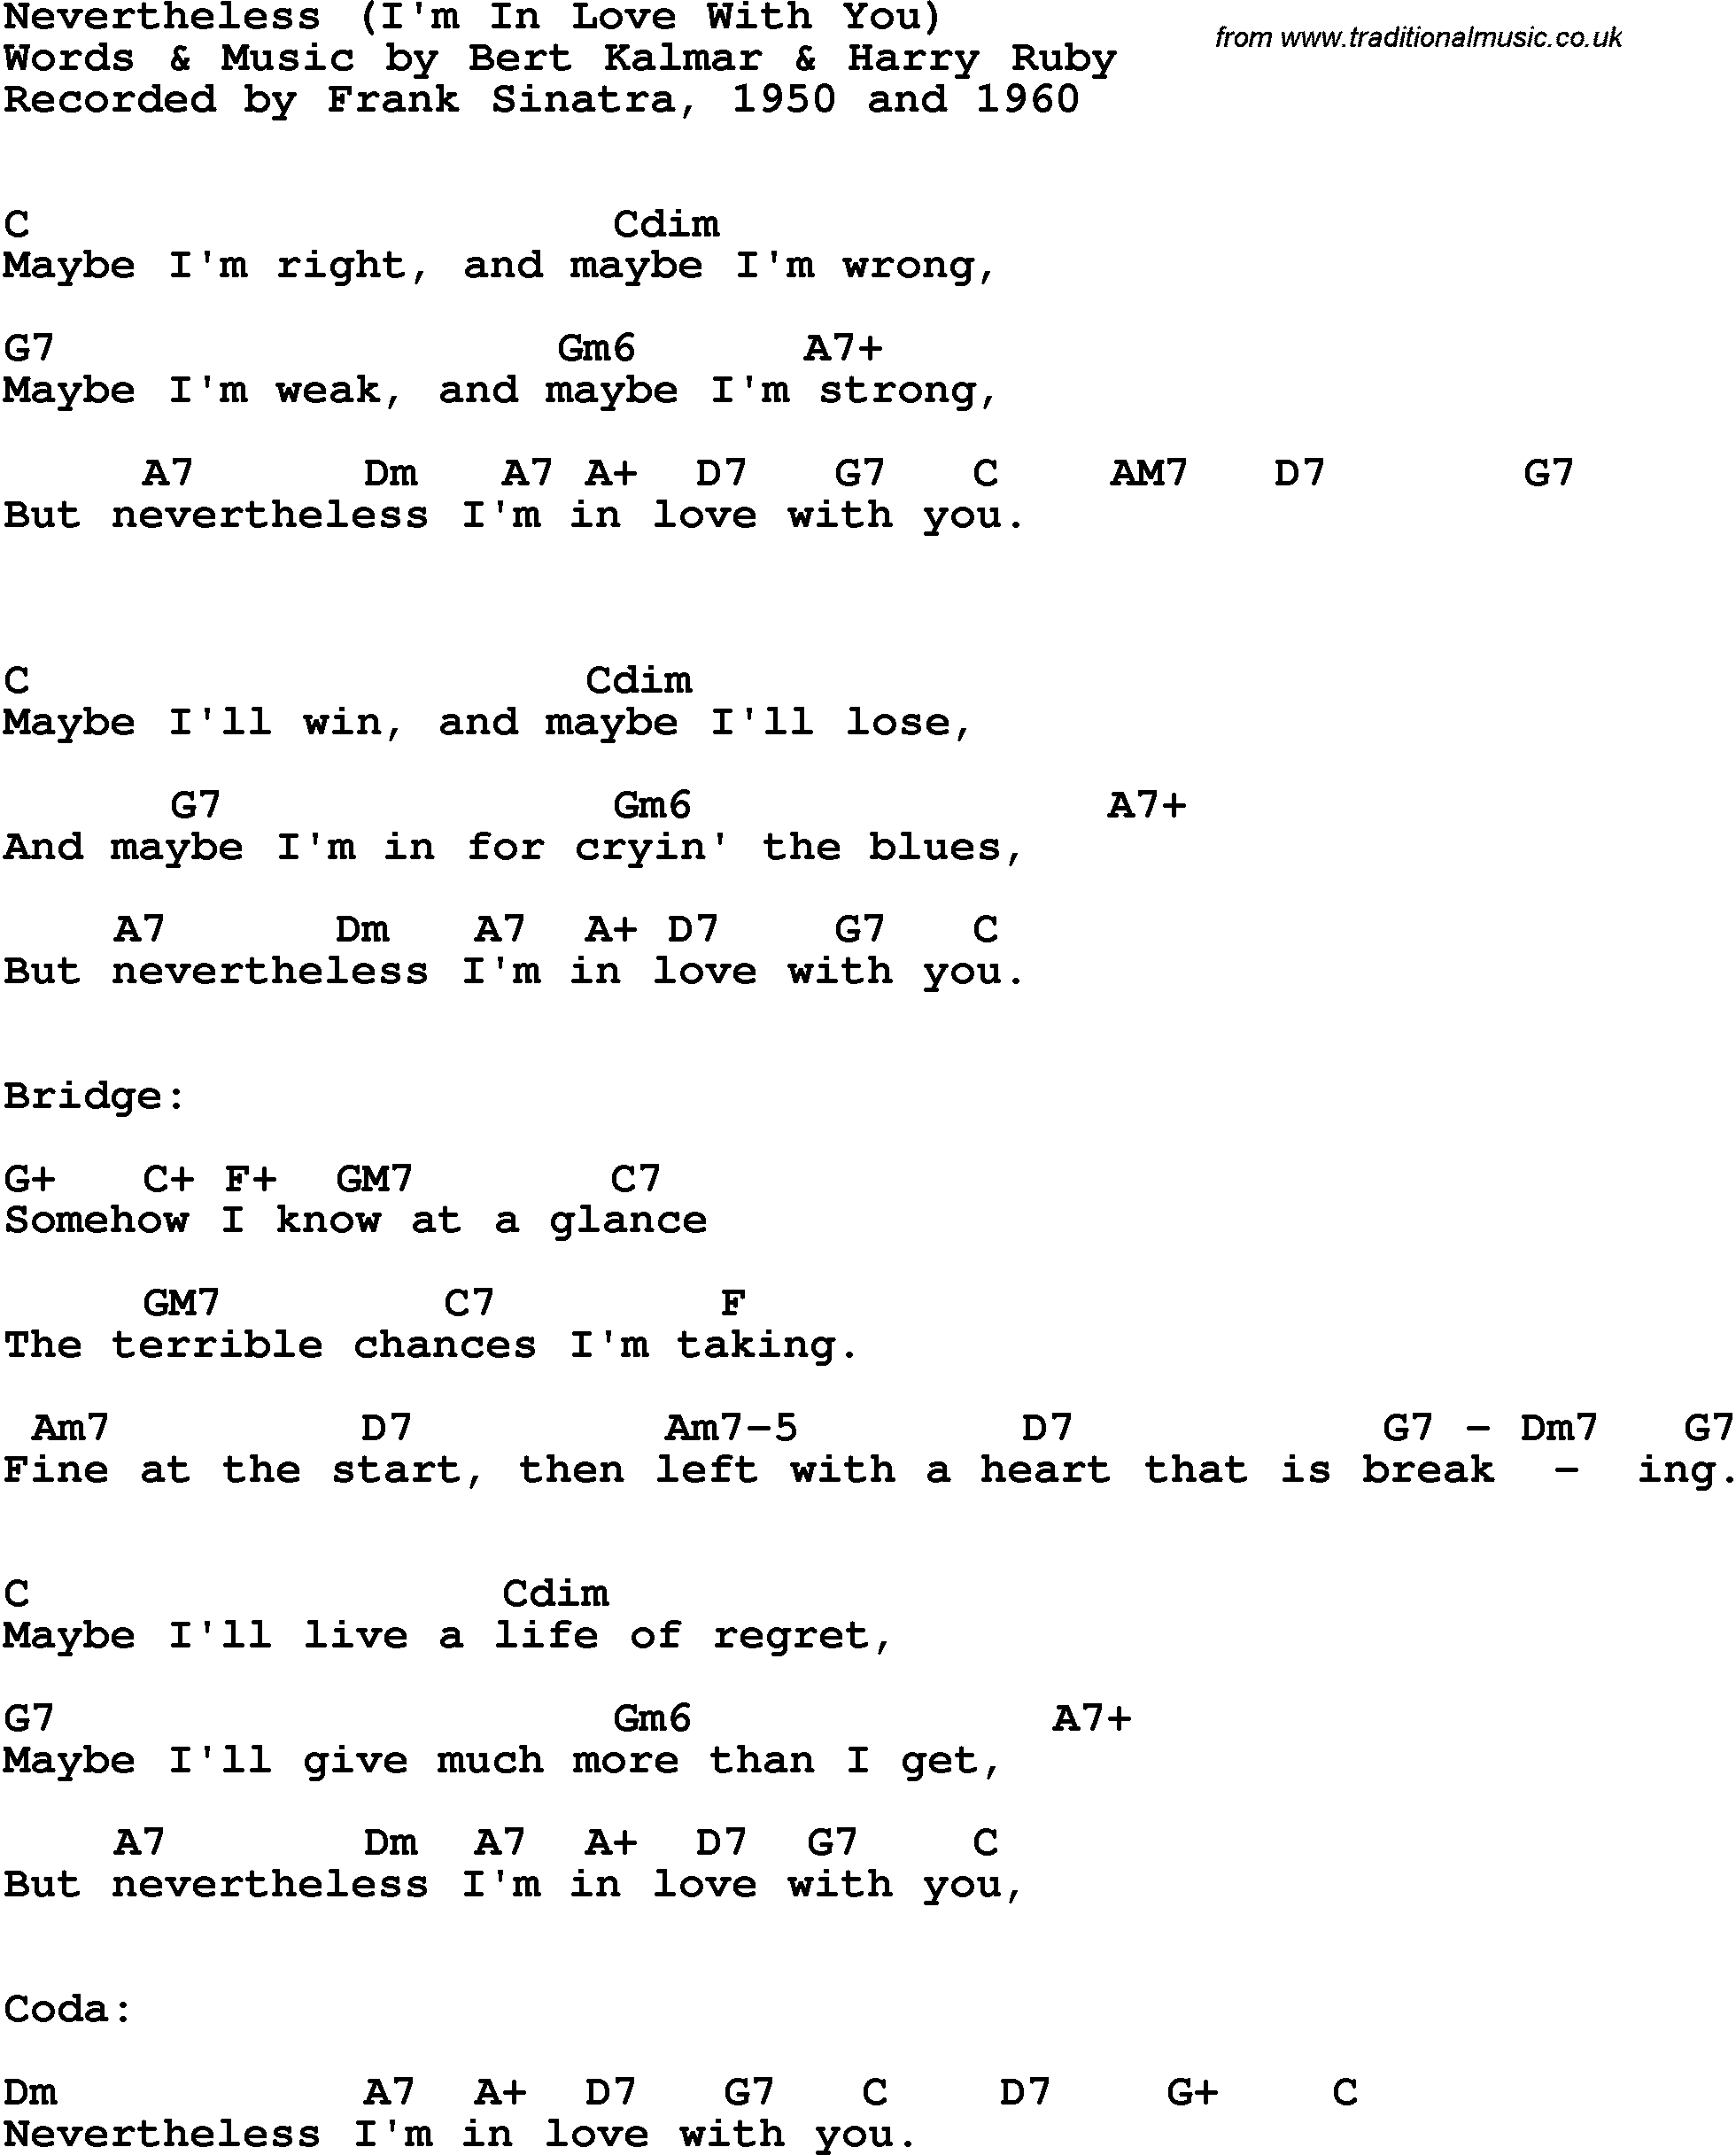 Song Lyrics with guitar chords for Nevertheless (I'm In Love With You) - Frank Sinatra, 1950